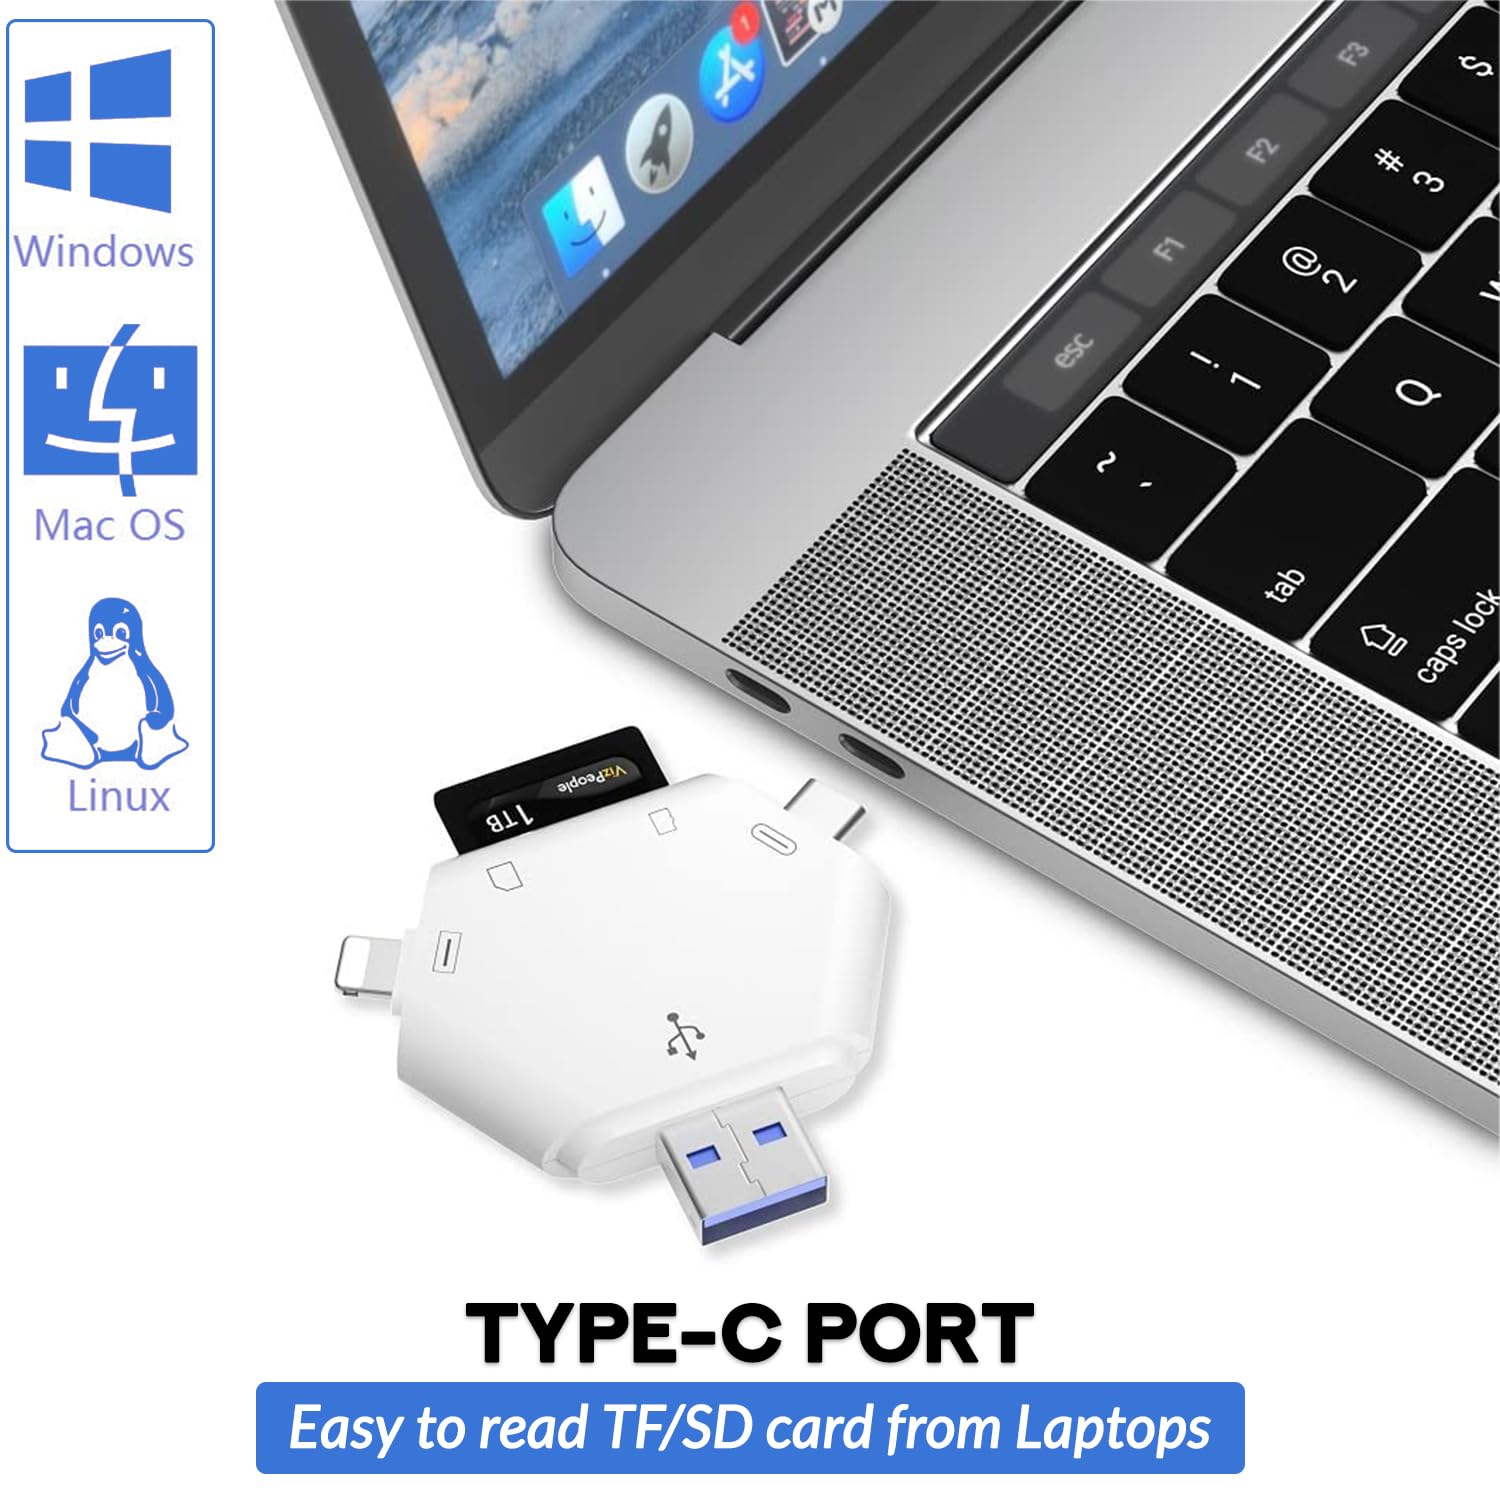 3-in-1 Portable SD Memory Card Reader : Lightning-Fast Data Transfer, Simplicity at Your Fingertips - Compact Flash Card Reader, sd Card Reader USB c - Micro sd Card Reader - Card Reader